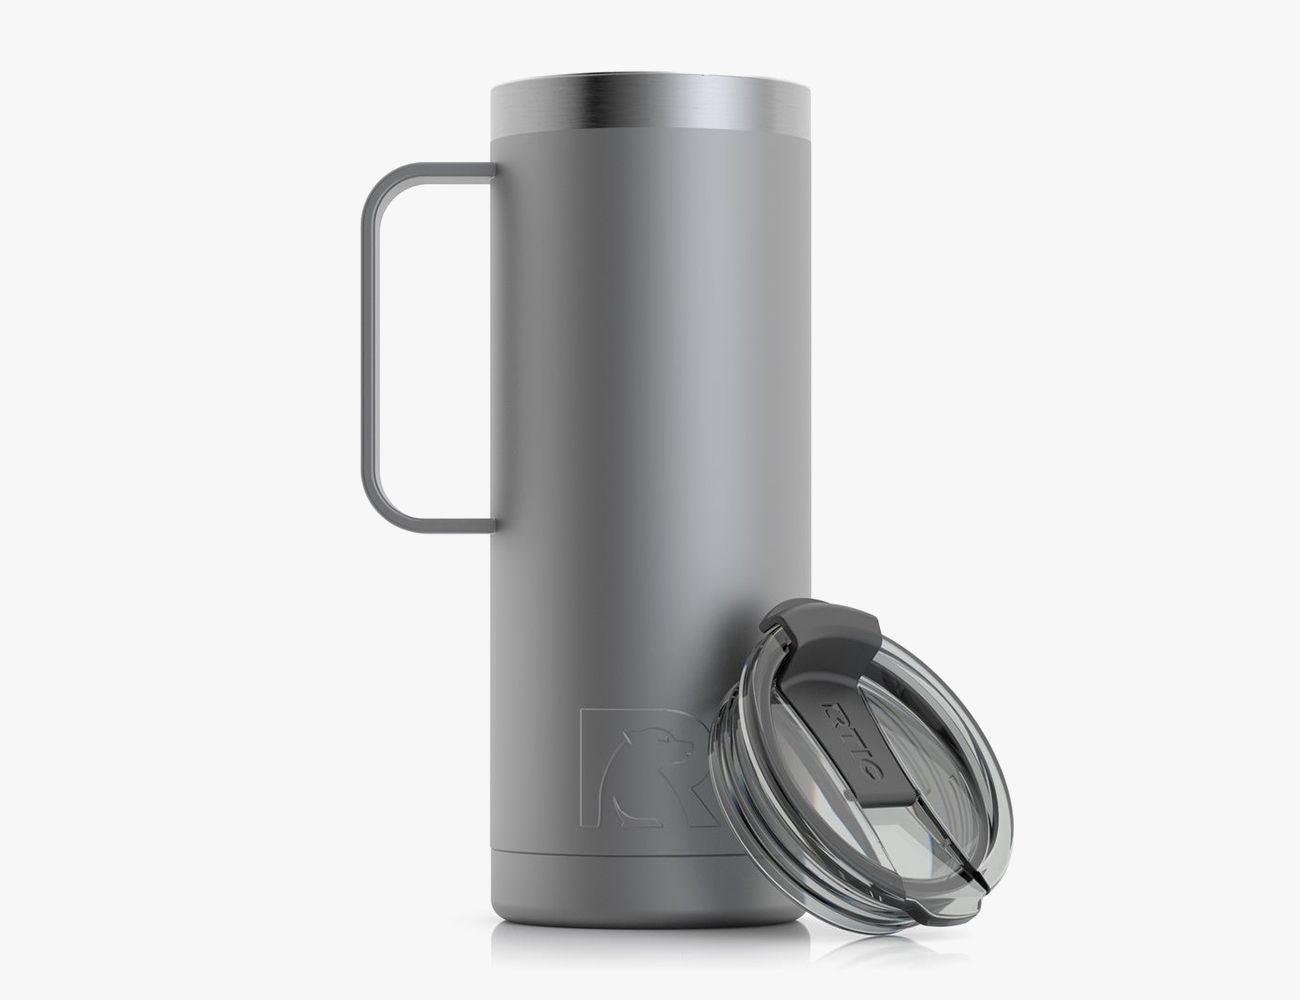 Readygogo Stainless Steel Vacuum Insulated Coffee Mug with Lid, Perfect Travel Cup for Hot and Cold Drinks, Thermal Coffee and Tea Mugs